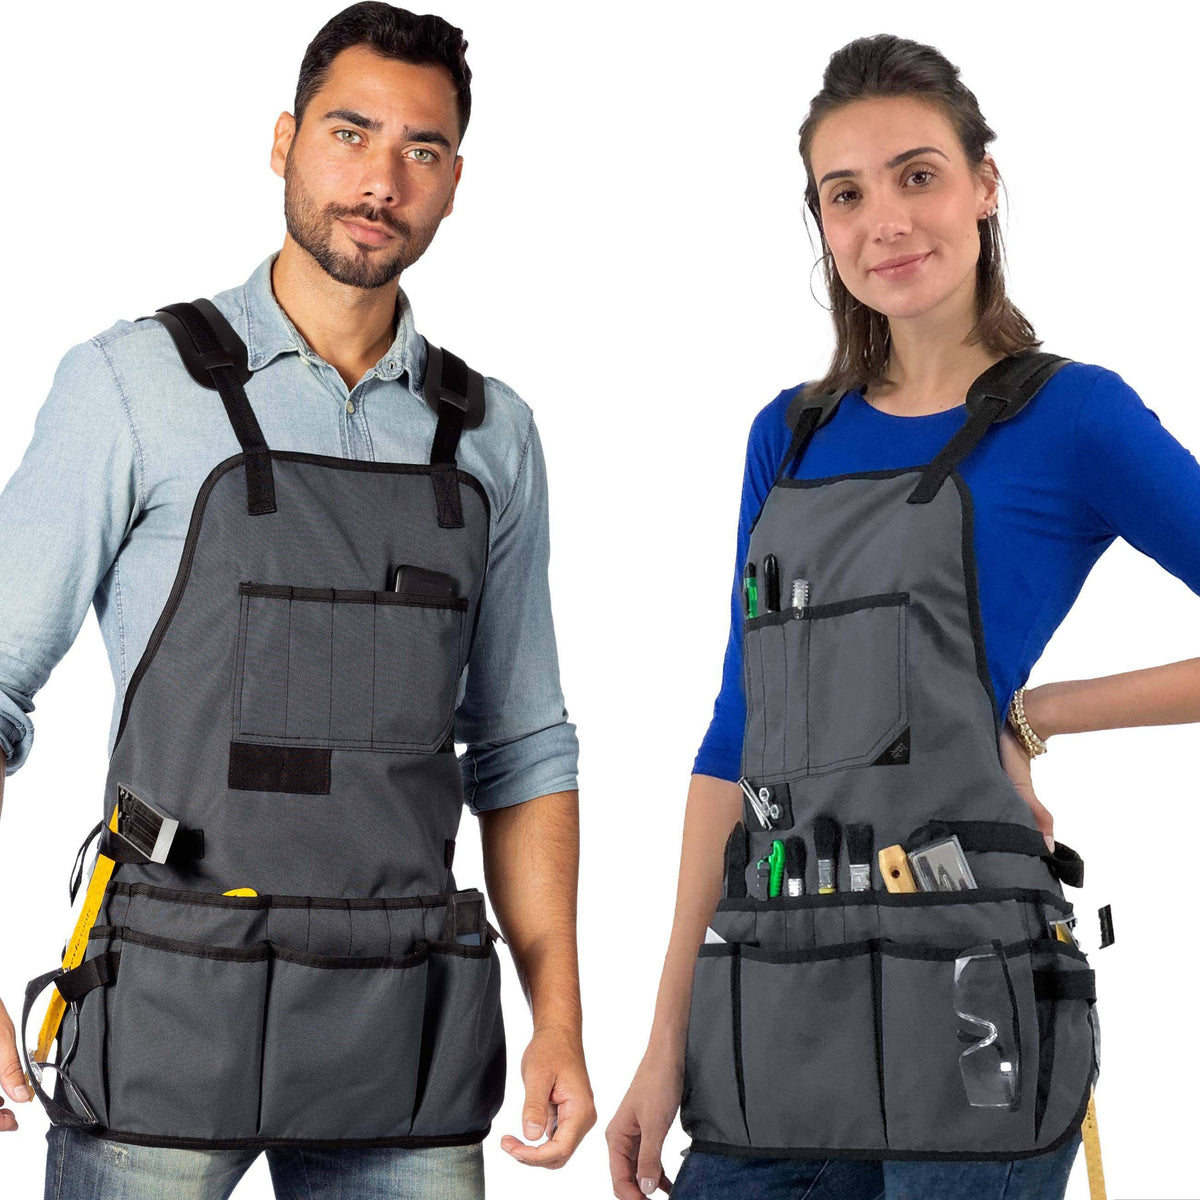 Tool Apron - Magnetic Holder, 18 Pockets, CrossBack, Oxford Canvas - Woodworker, Electrician - Under NY Sky